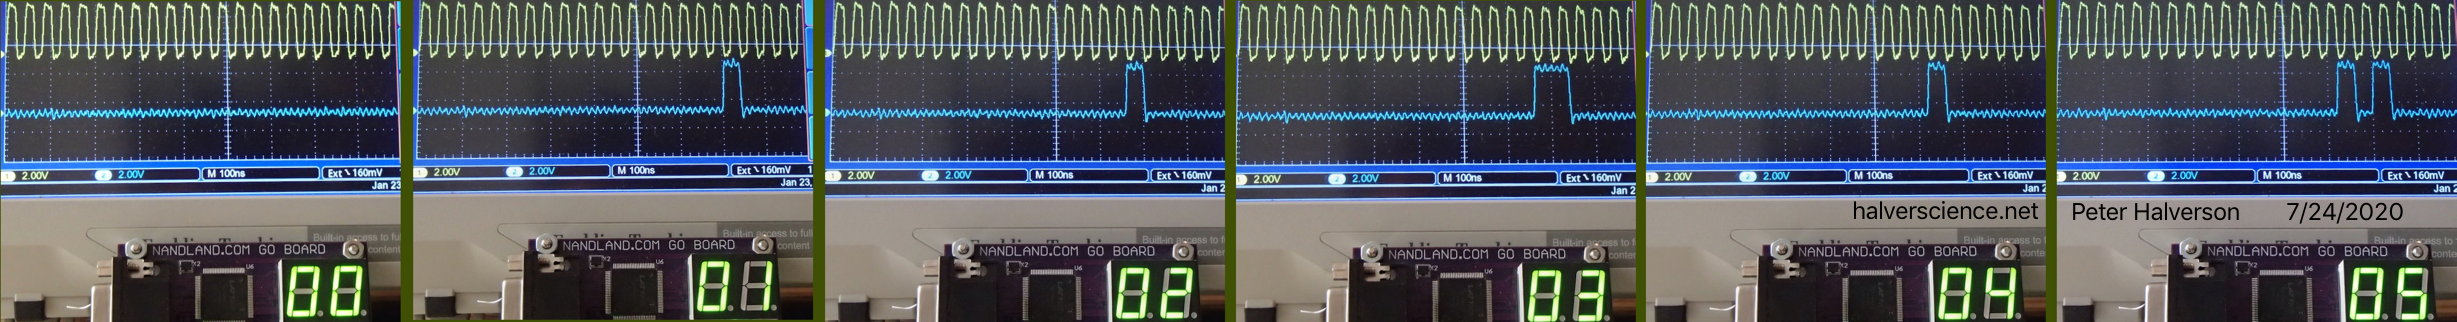 <strong>SCLK and DIN signals for five DAC samples. Note how the rising edges of the 25 MHz clock indicate when the data signal is holding its "1" or "0" level. The data are 0,1,2,3,4,5 (ignoring leading zeroes). The scope was triggered by the ~CS signal, so the horizontal positions in each case can be compared.</strong>